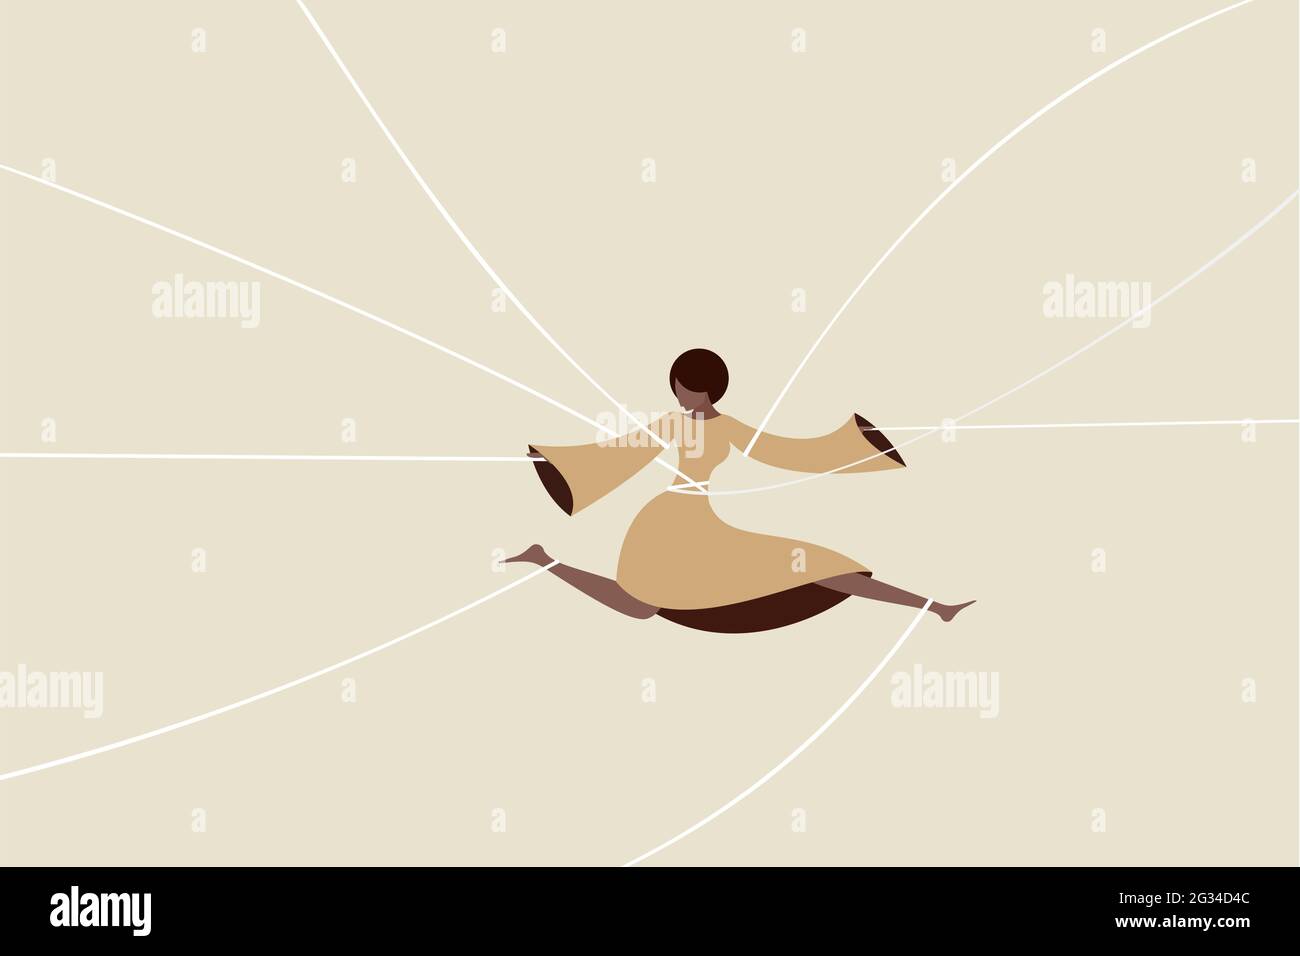 Conceptual illustration of a girl with controlling strings tied to her while in motion Stock Vector